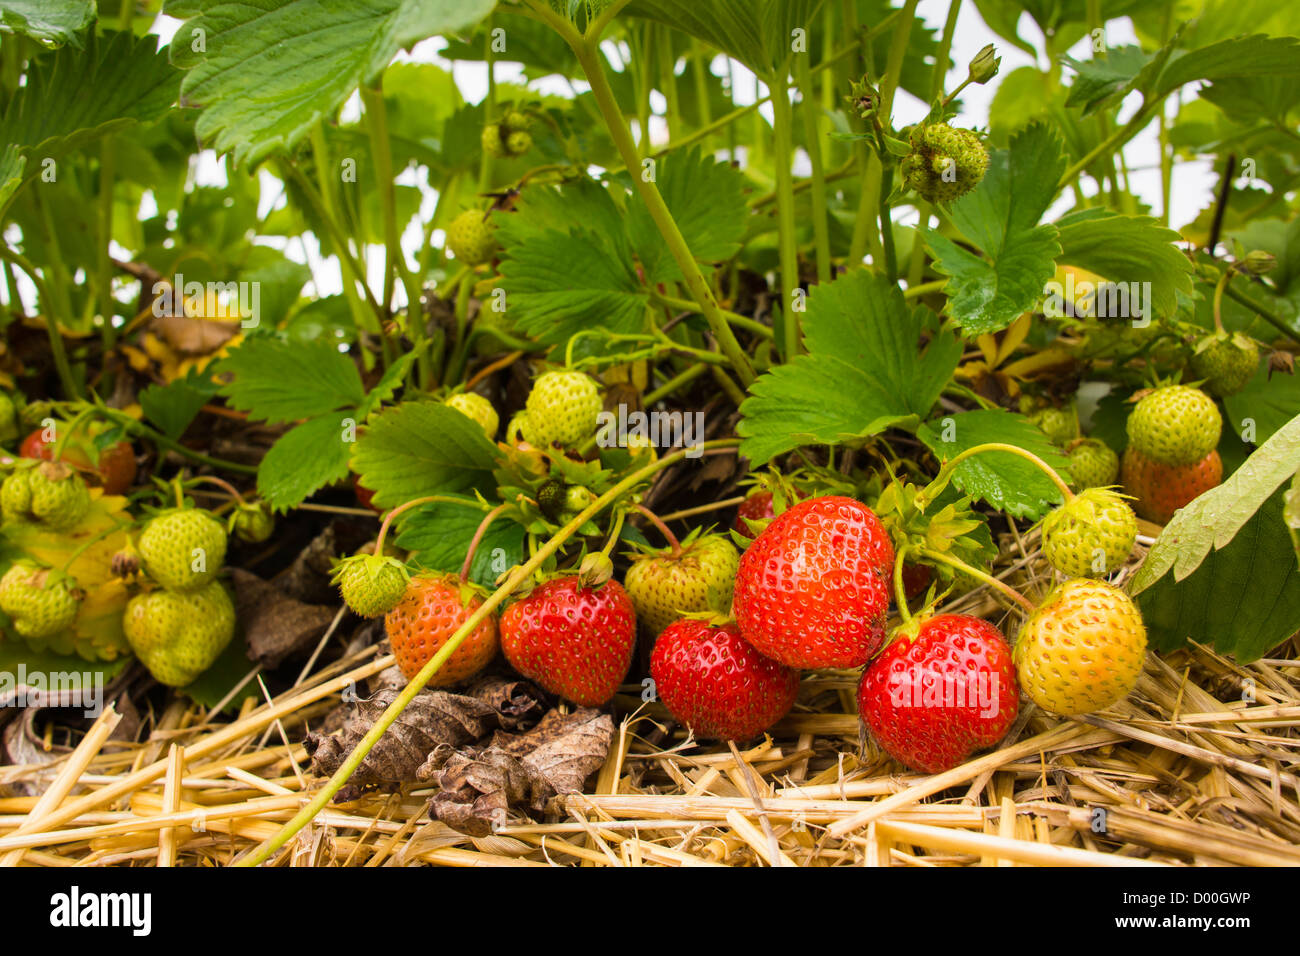 A mixture of red and green strawberries resting on straw. Stock Photo